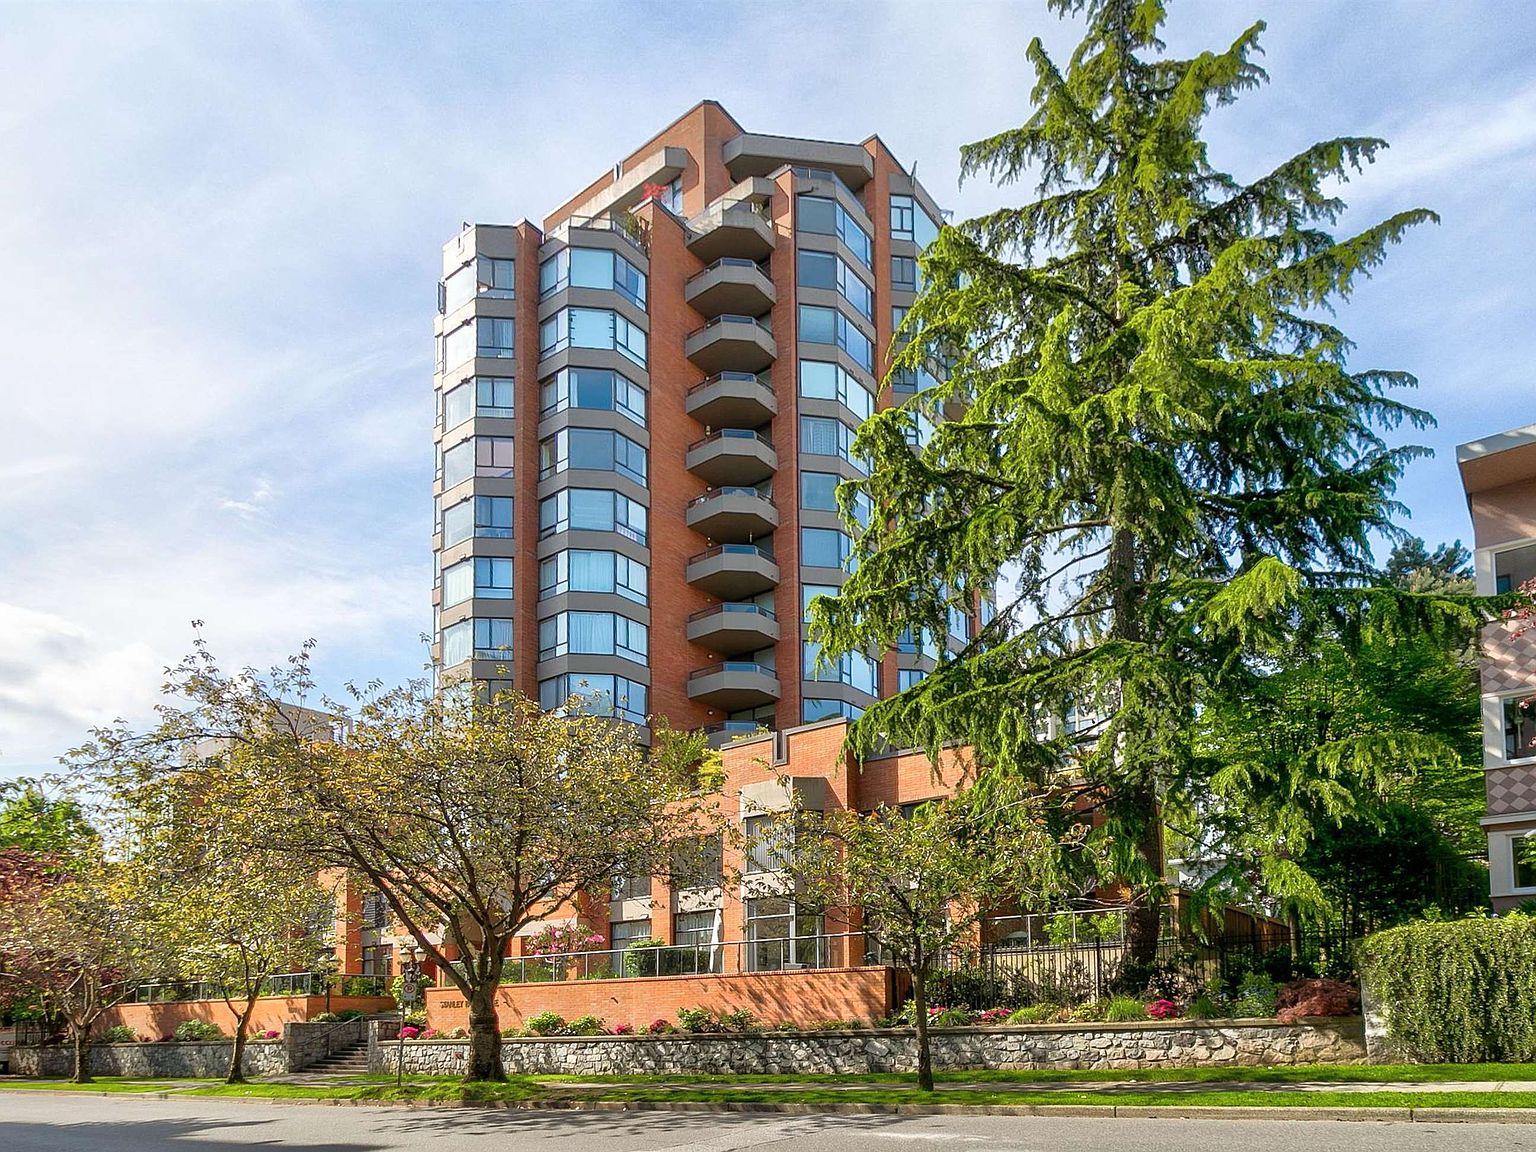 For sale: 1296 ROBSON STREET, Vancouver, British Columbia V6E1C1 - C8058055